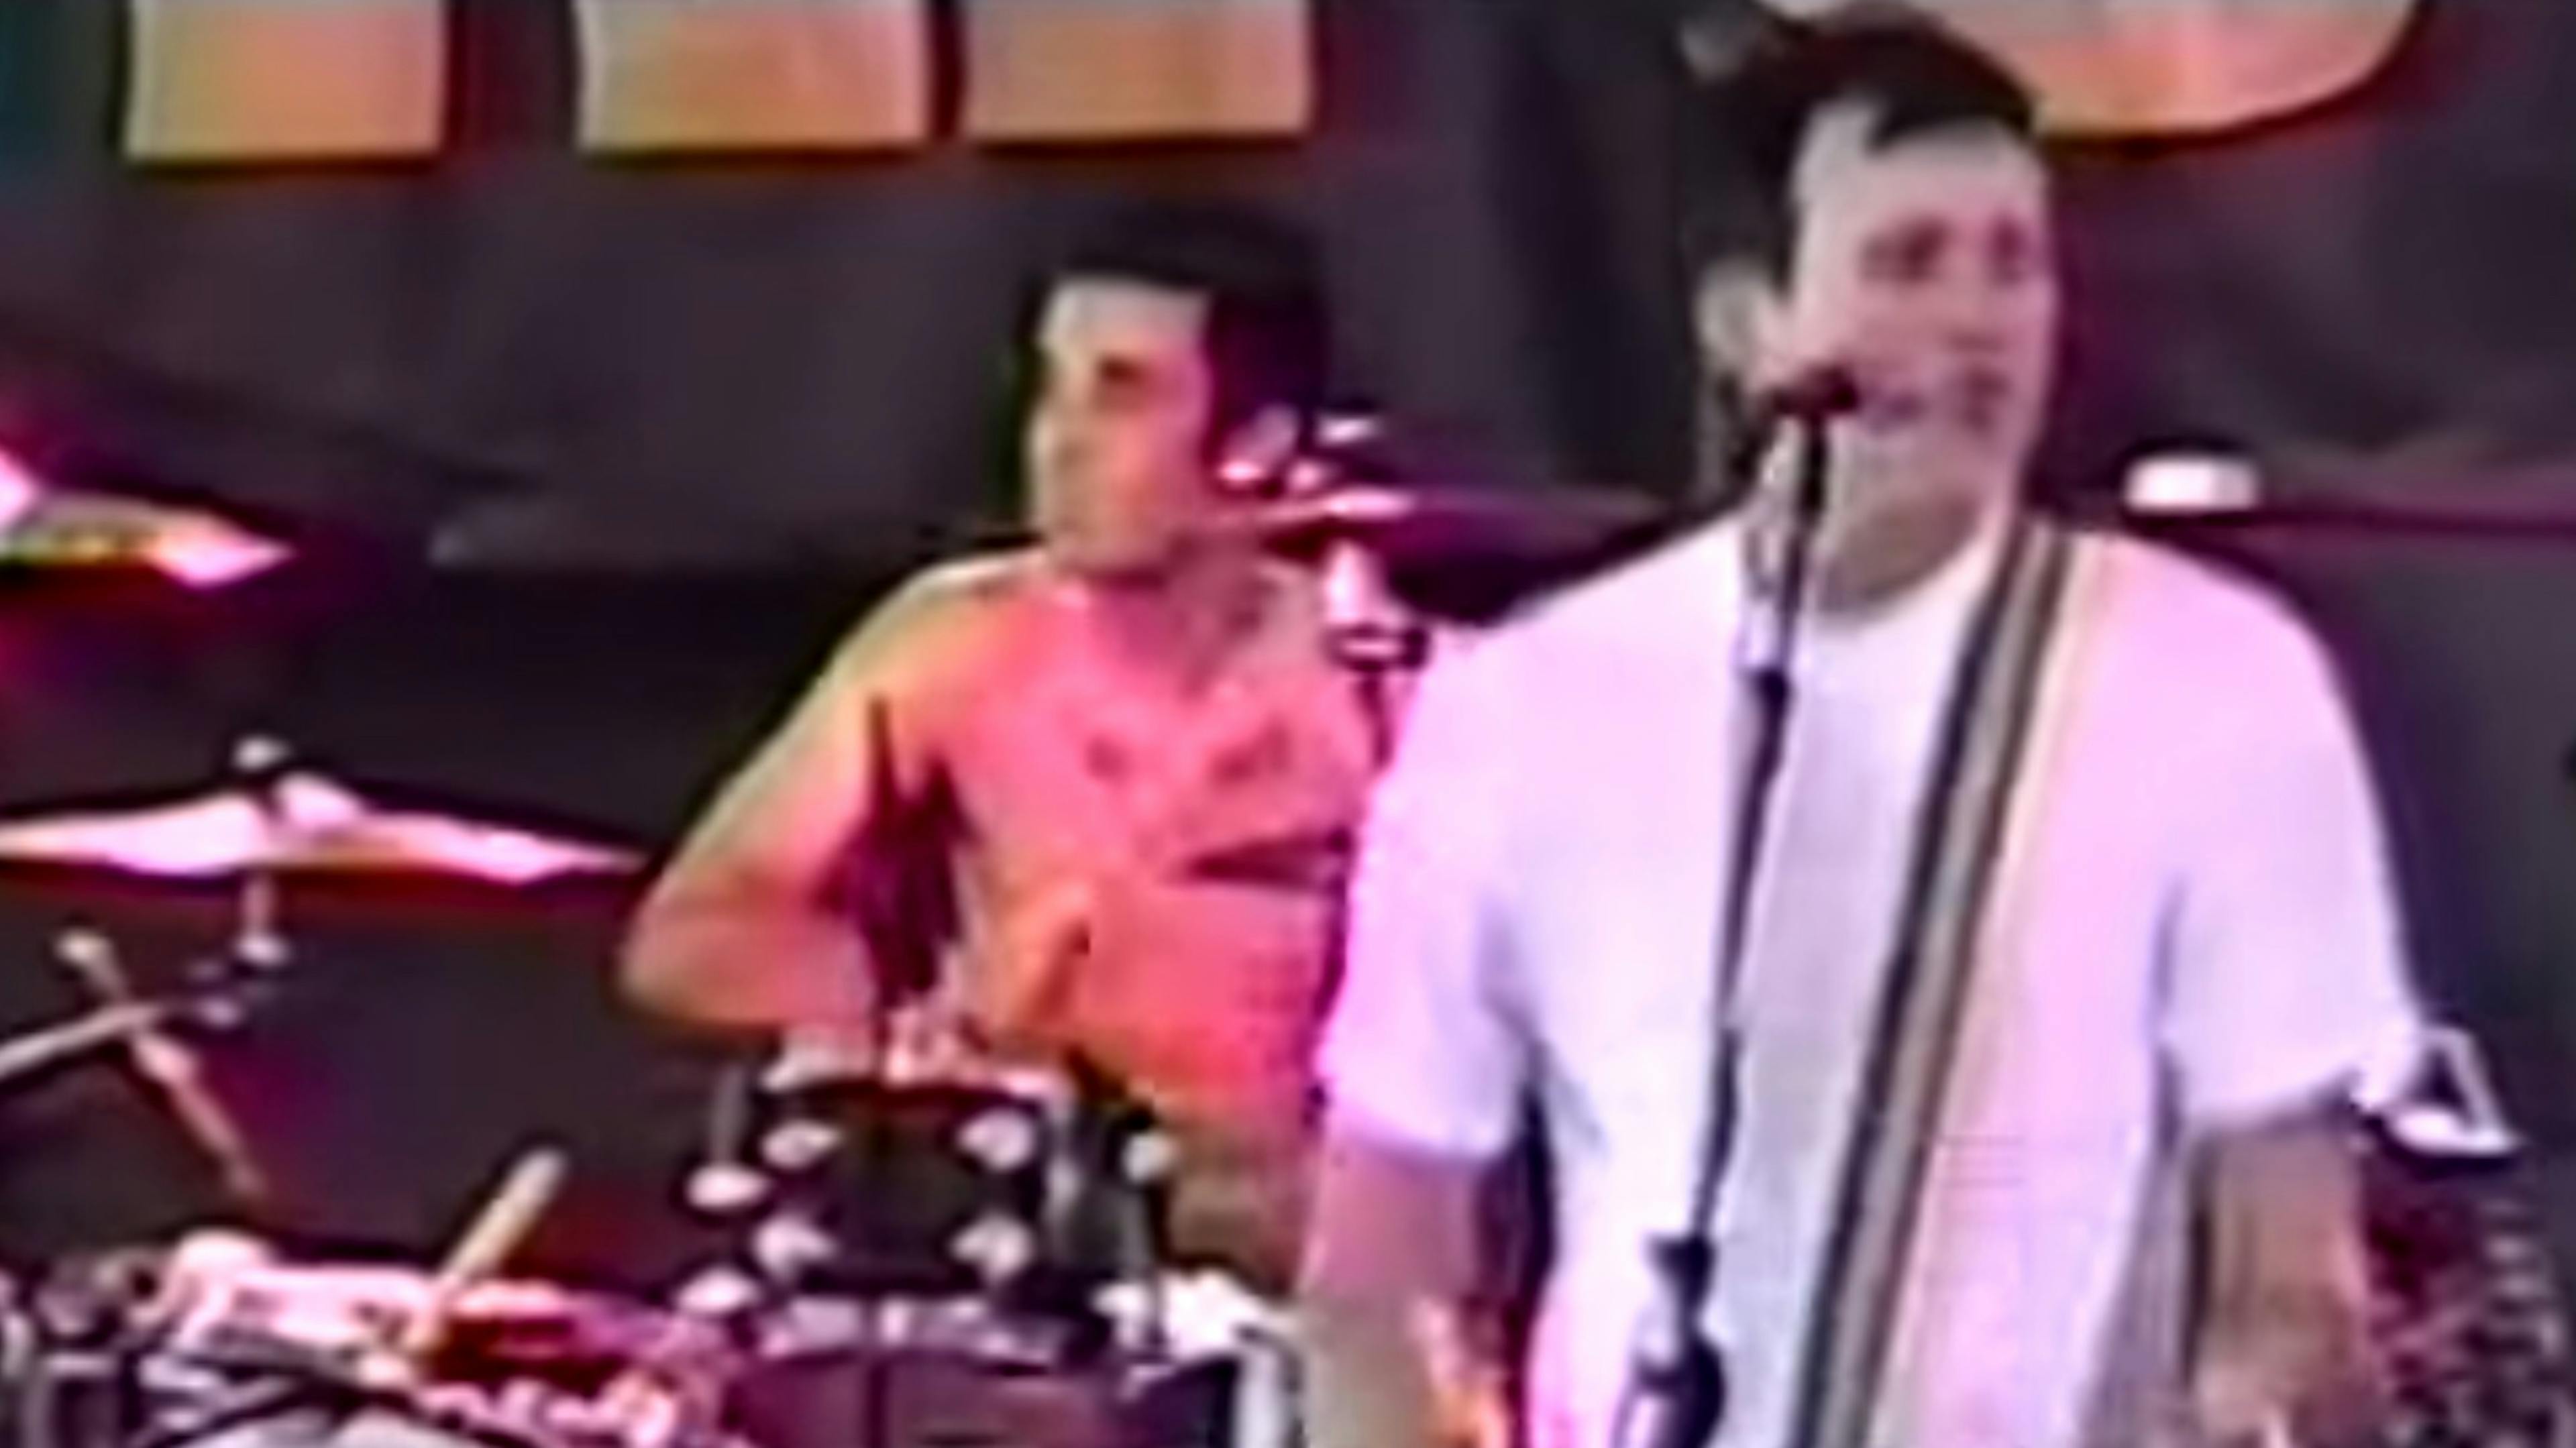 Watch blink-182's First Show Ever With Travis Barker